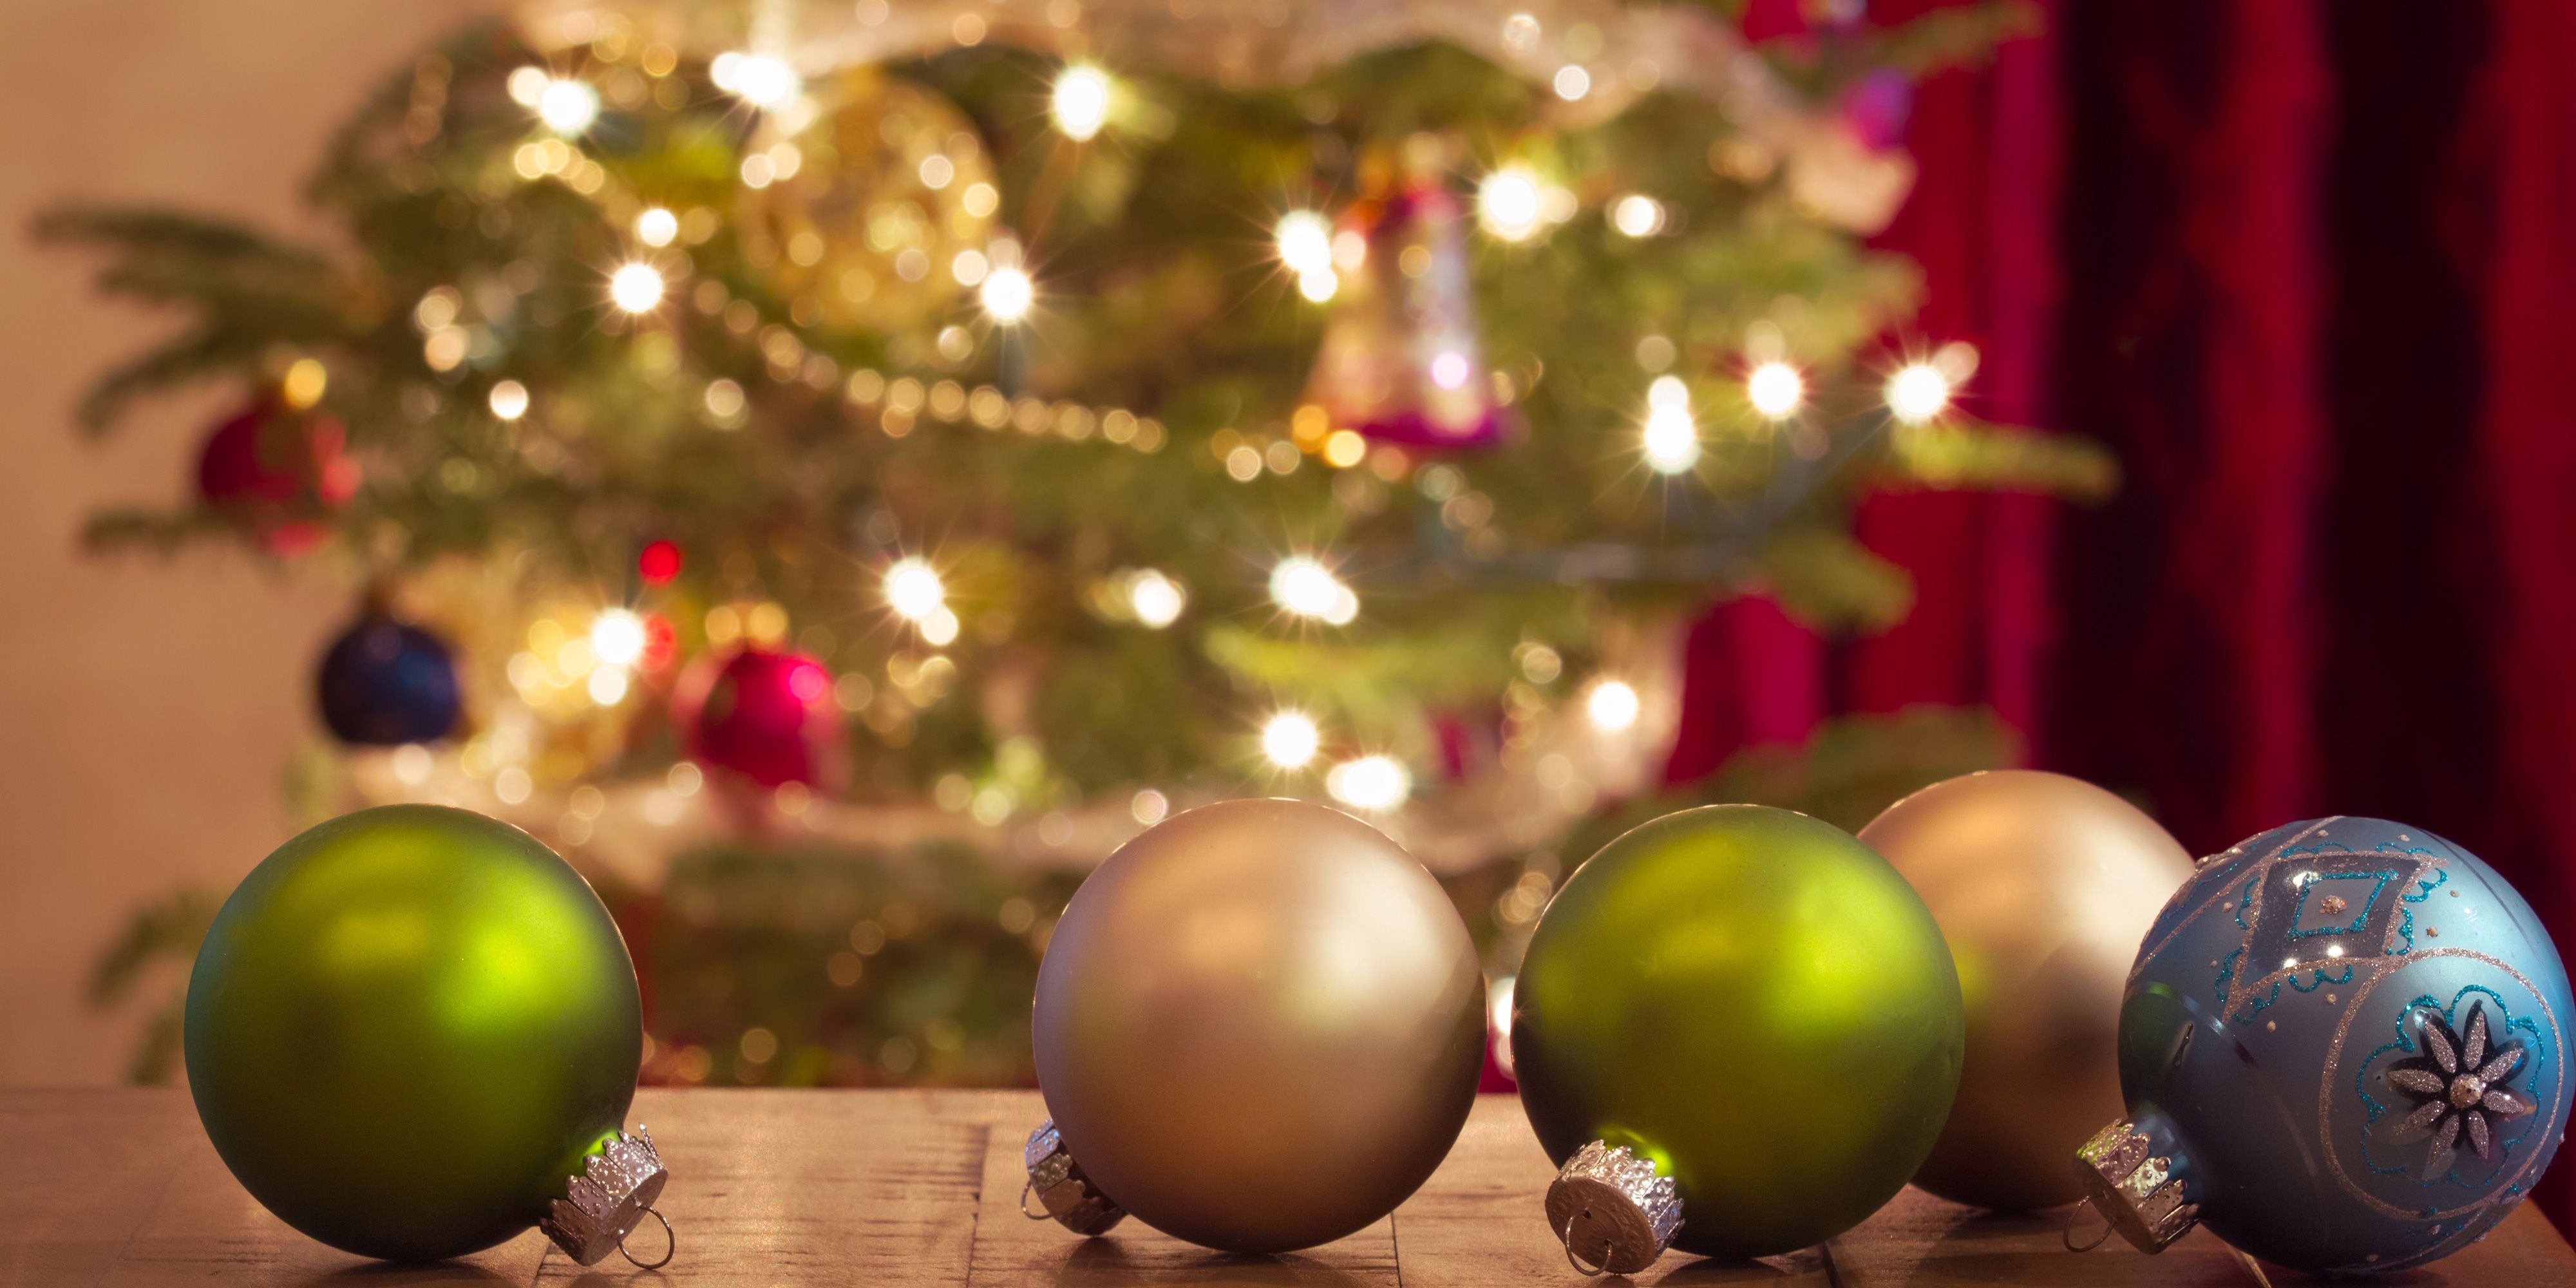 Why a psychologist believes putting up your Christmas decorations early is good for your happiness